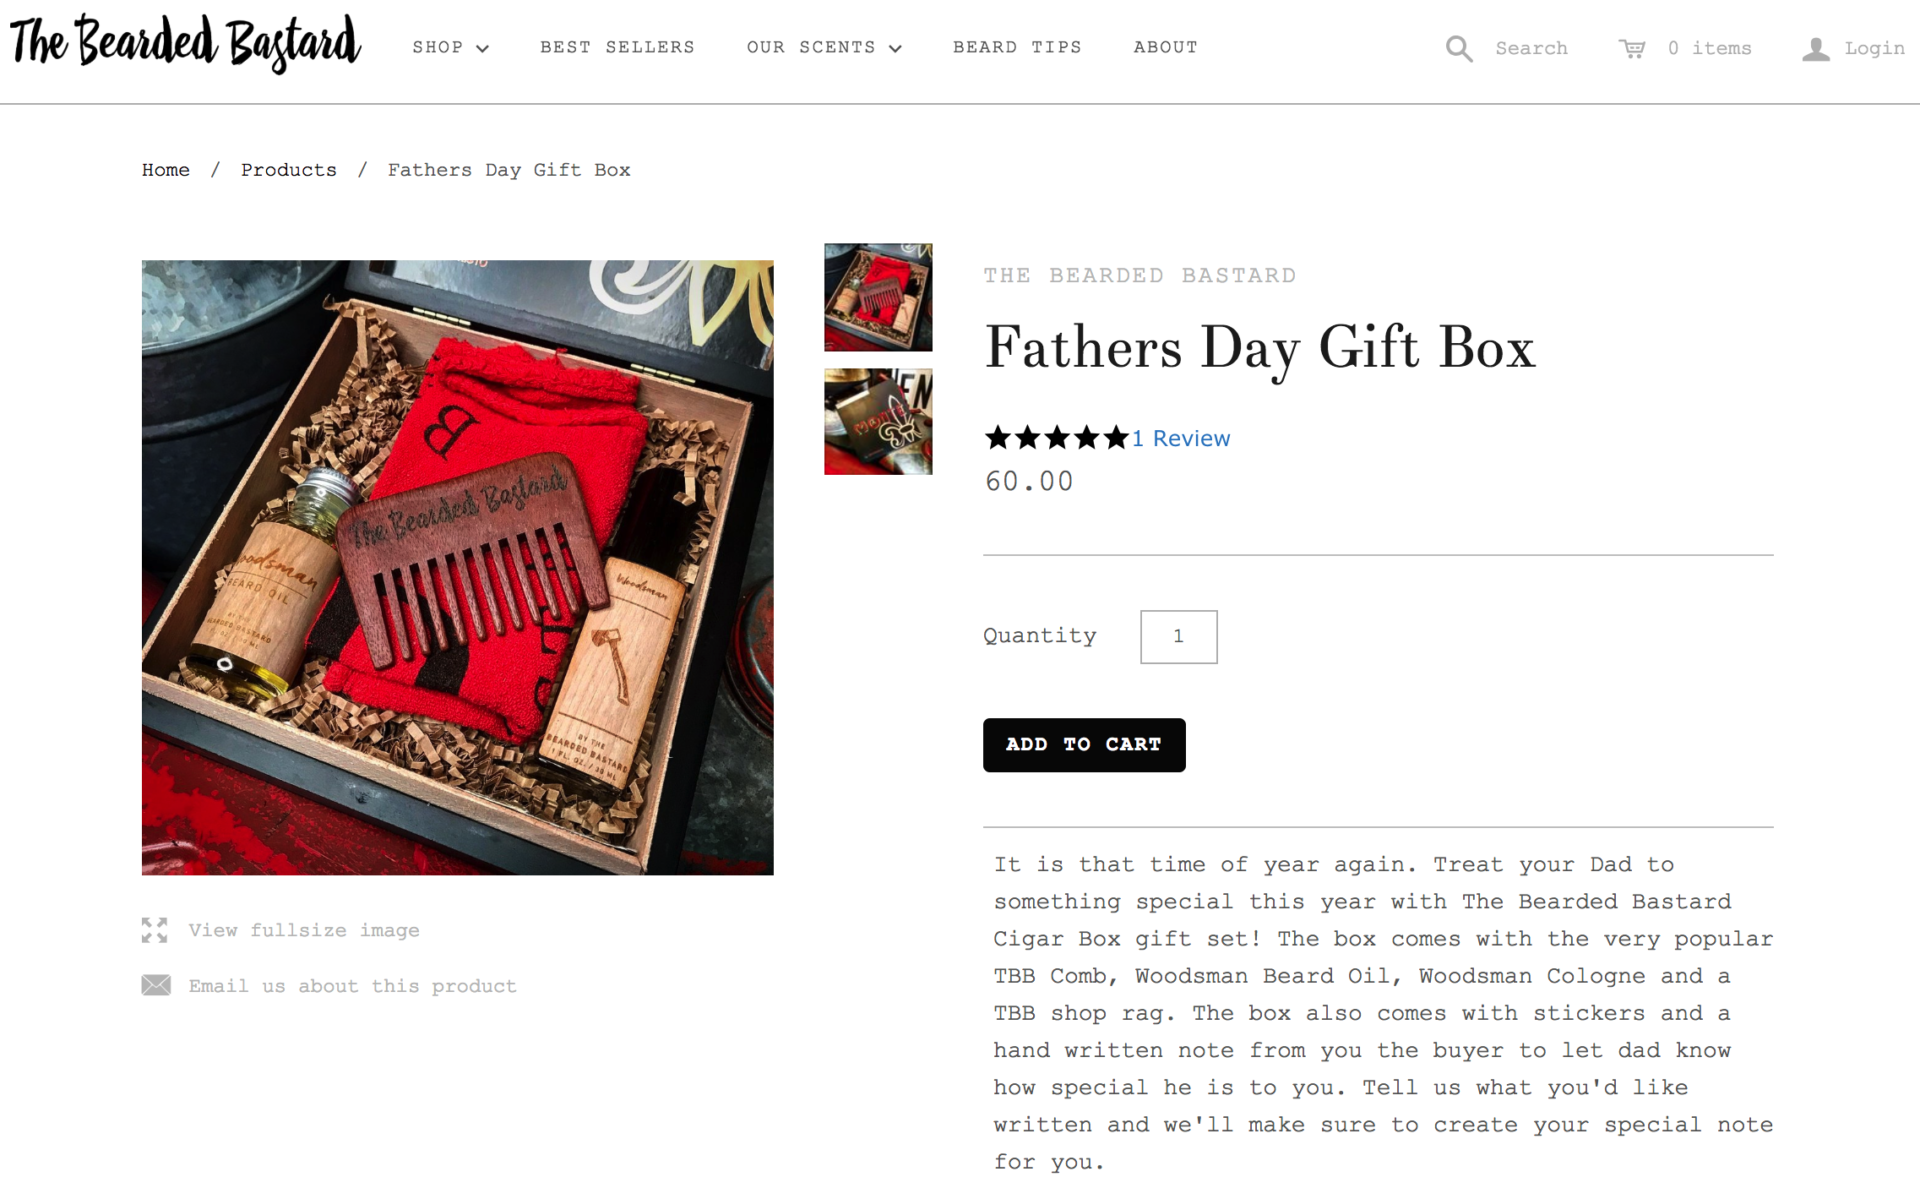 Father's Day Marketing - Father's Day Gift Box